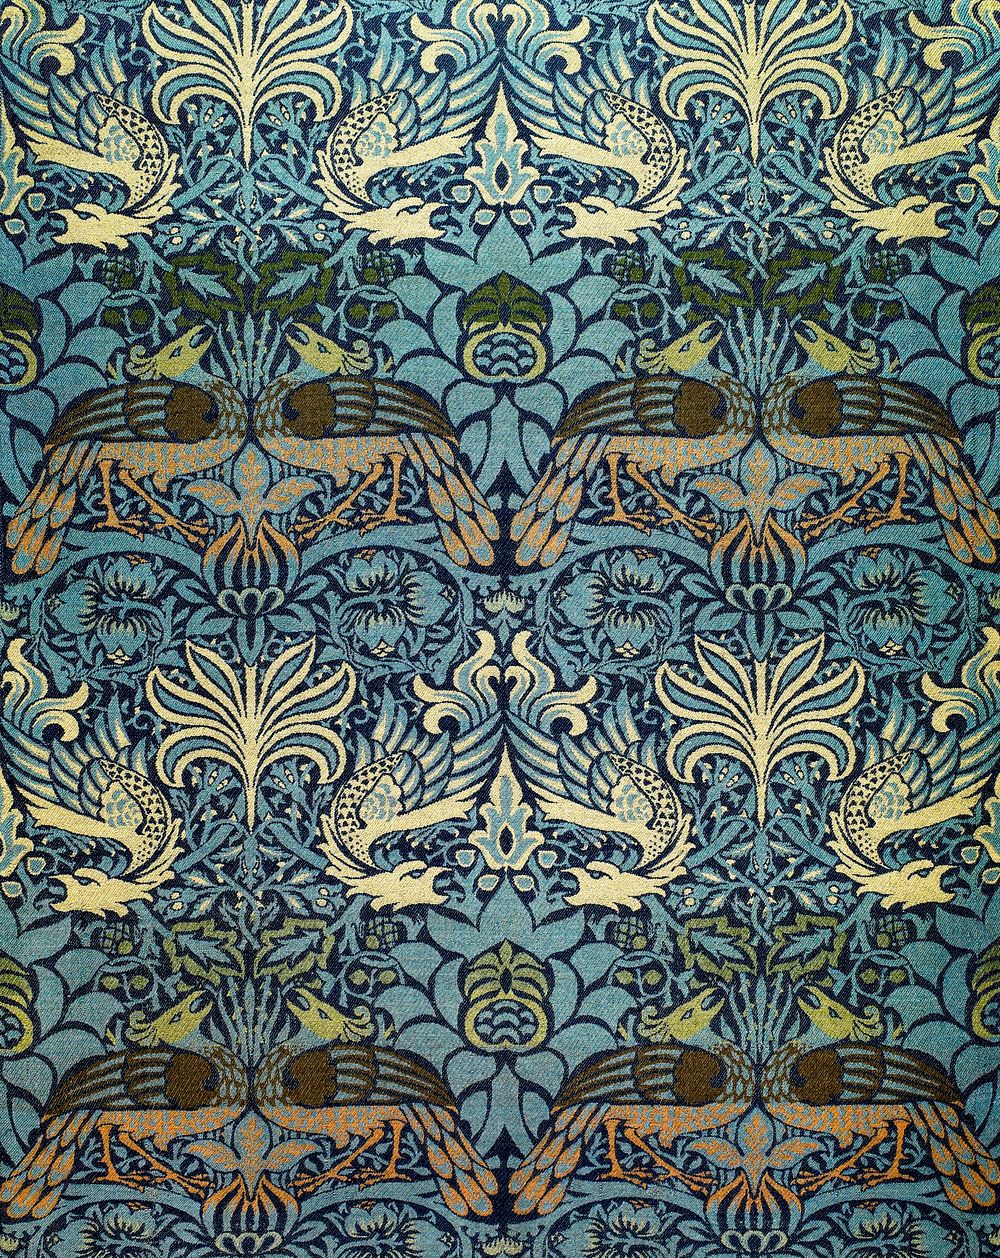 William Morris's (1834-1896) Woven woolen fabric: Peacock and Dragon, famous pattern. Original from The Birmingham Museum.…